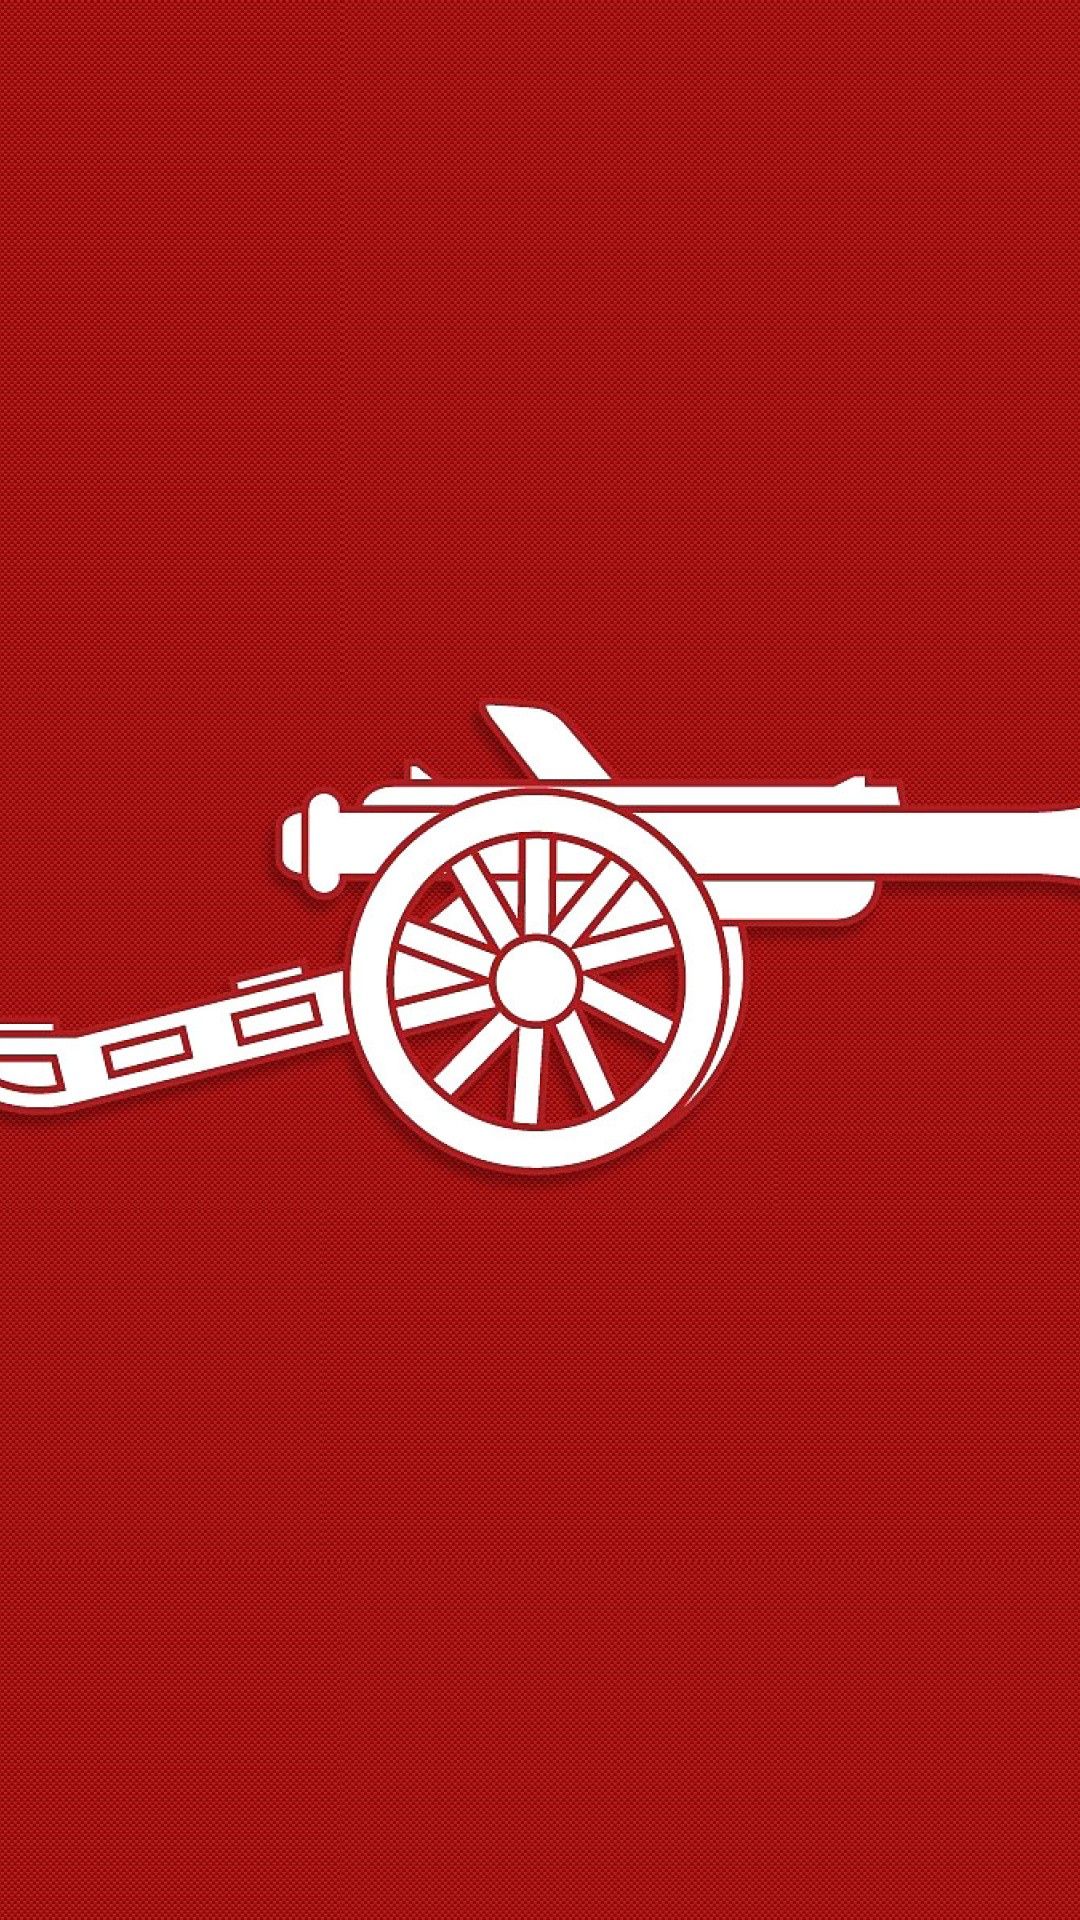 HD Arsenal Logo Wallpaper For Mobile Amazing Image Windows Wallpaper Smart Phone Background Photo Widescreen High Quality Artworks Dual M